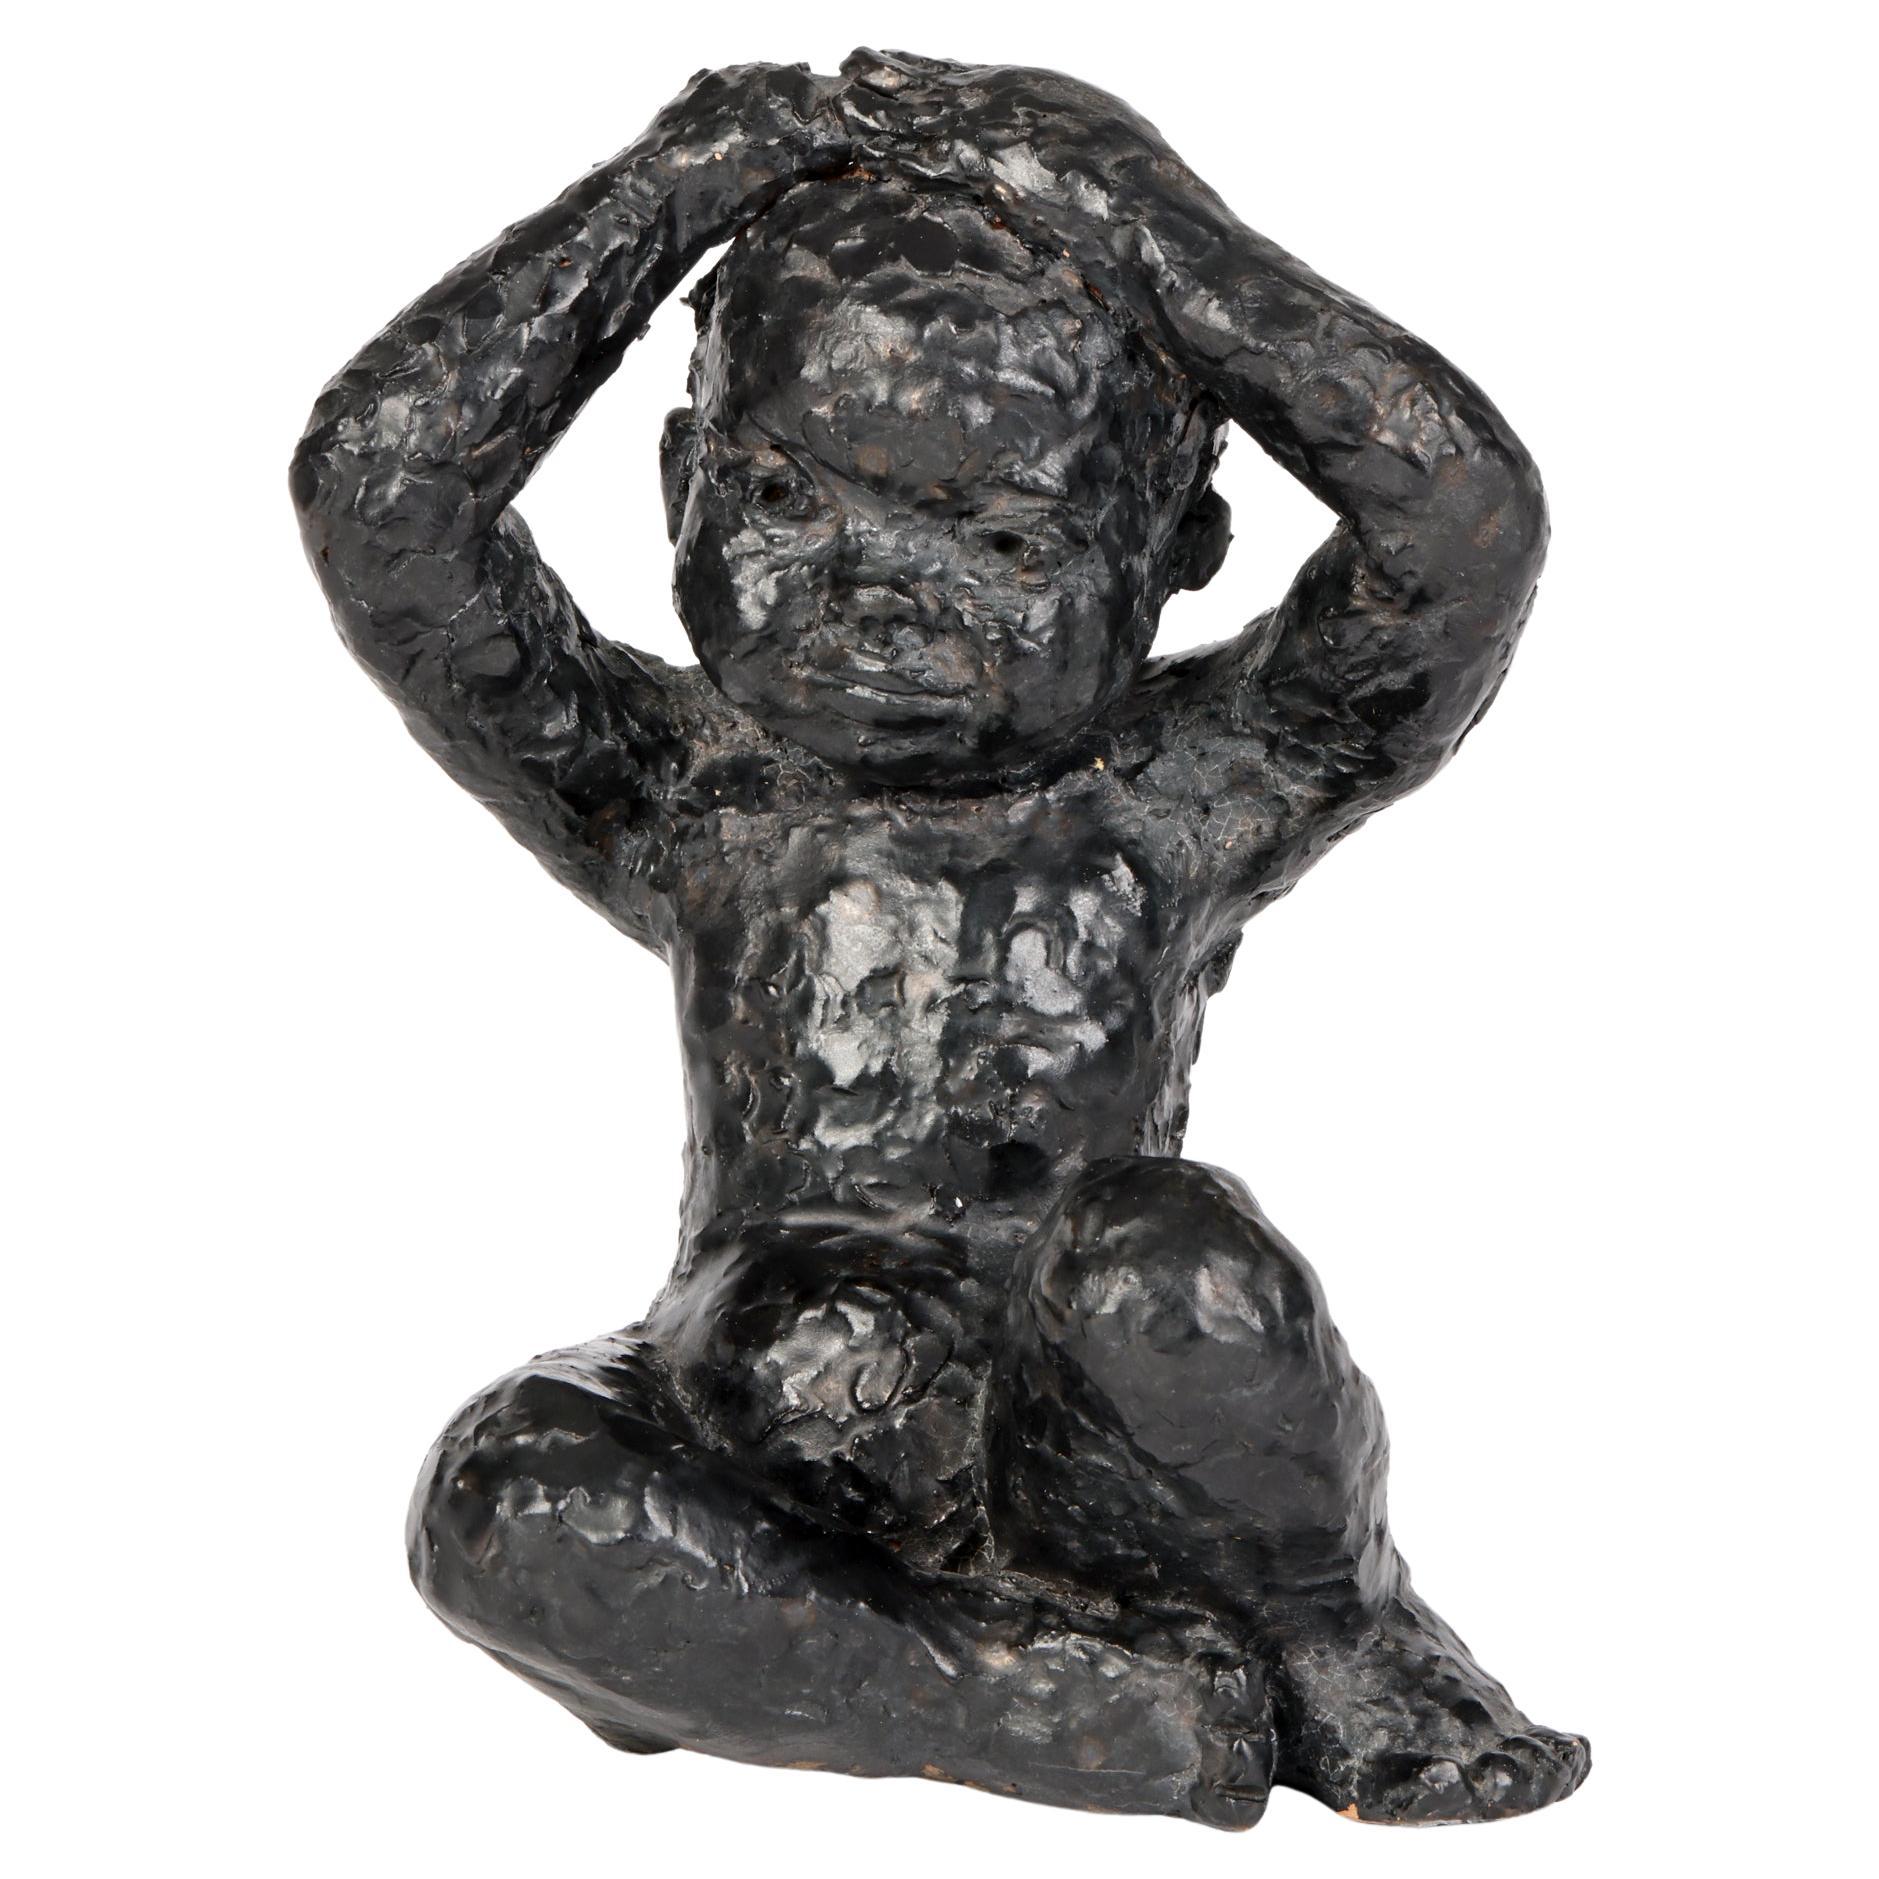 George West Studio Pottery Black Glazed Seated Child Sculpture Dated 1969 For Sale